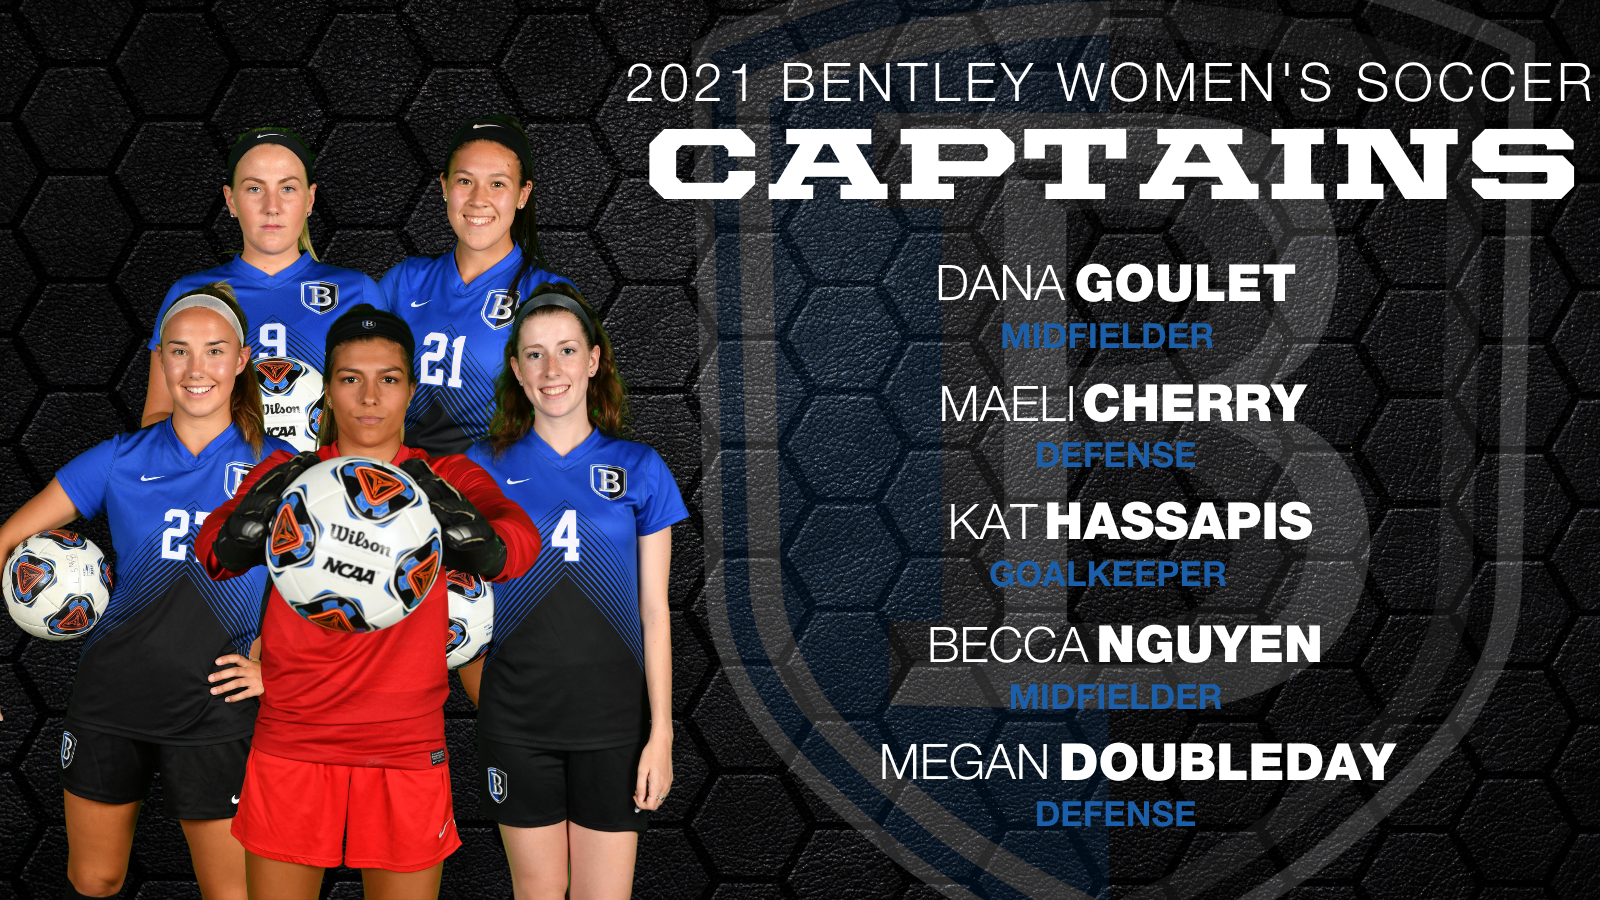 Five Student-Athletes to Serve as Captains of Bentley Women’s Soccer for 2021 Season